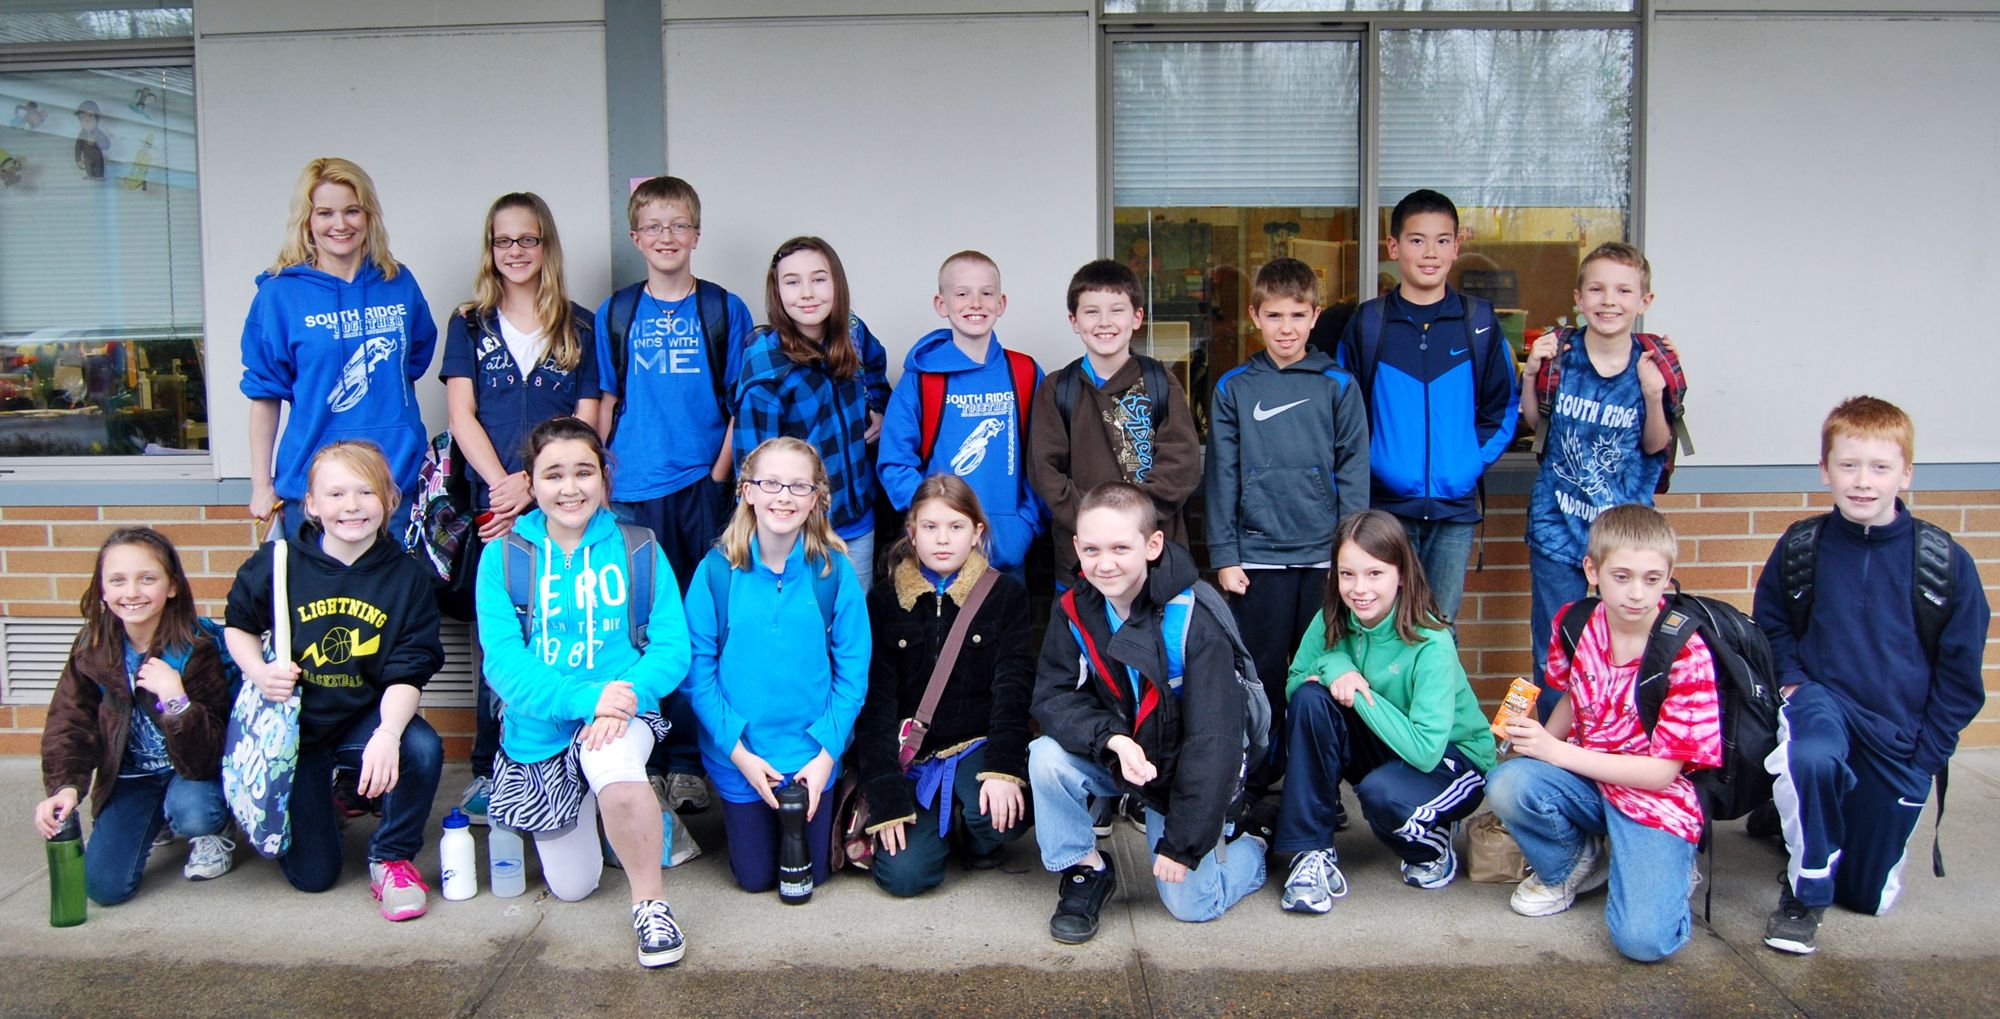 The fourth grade math team from South Ridge Elementary School in Ridgefield placed first in its division at the Math is Cool Regional Championship competition April 15.